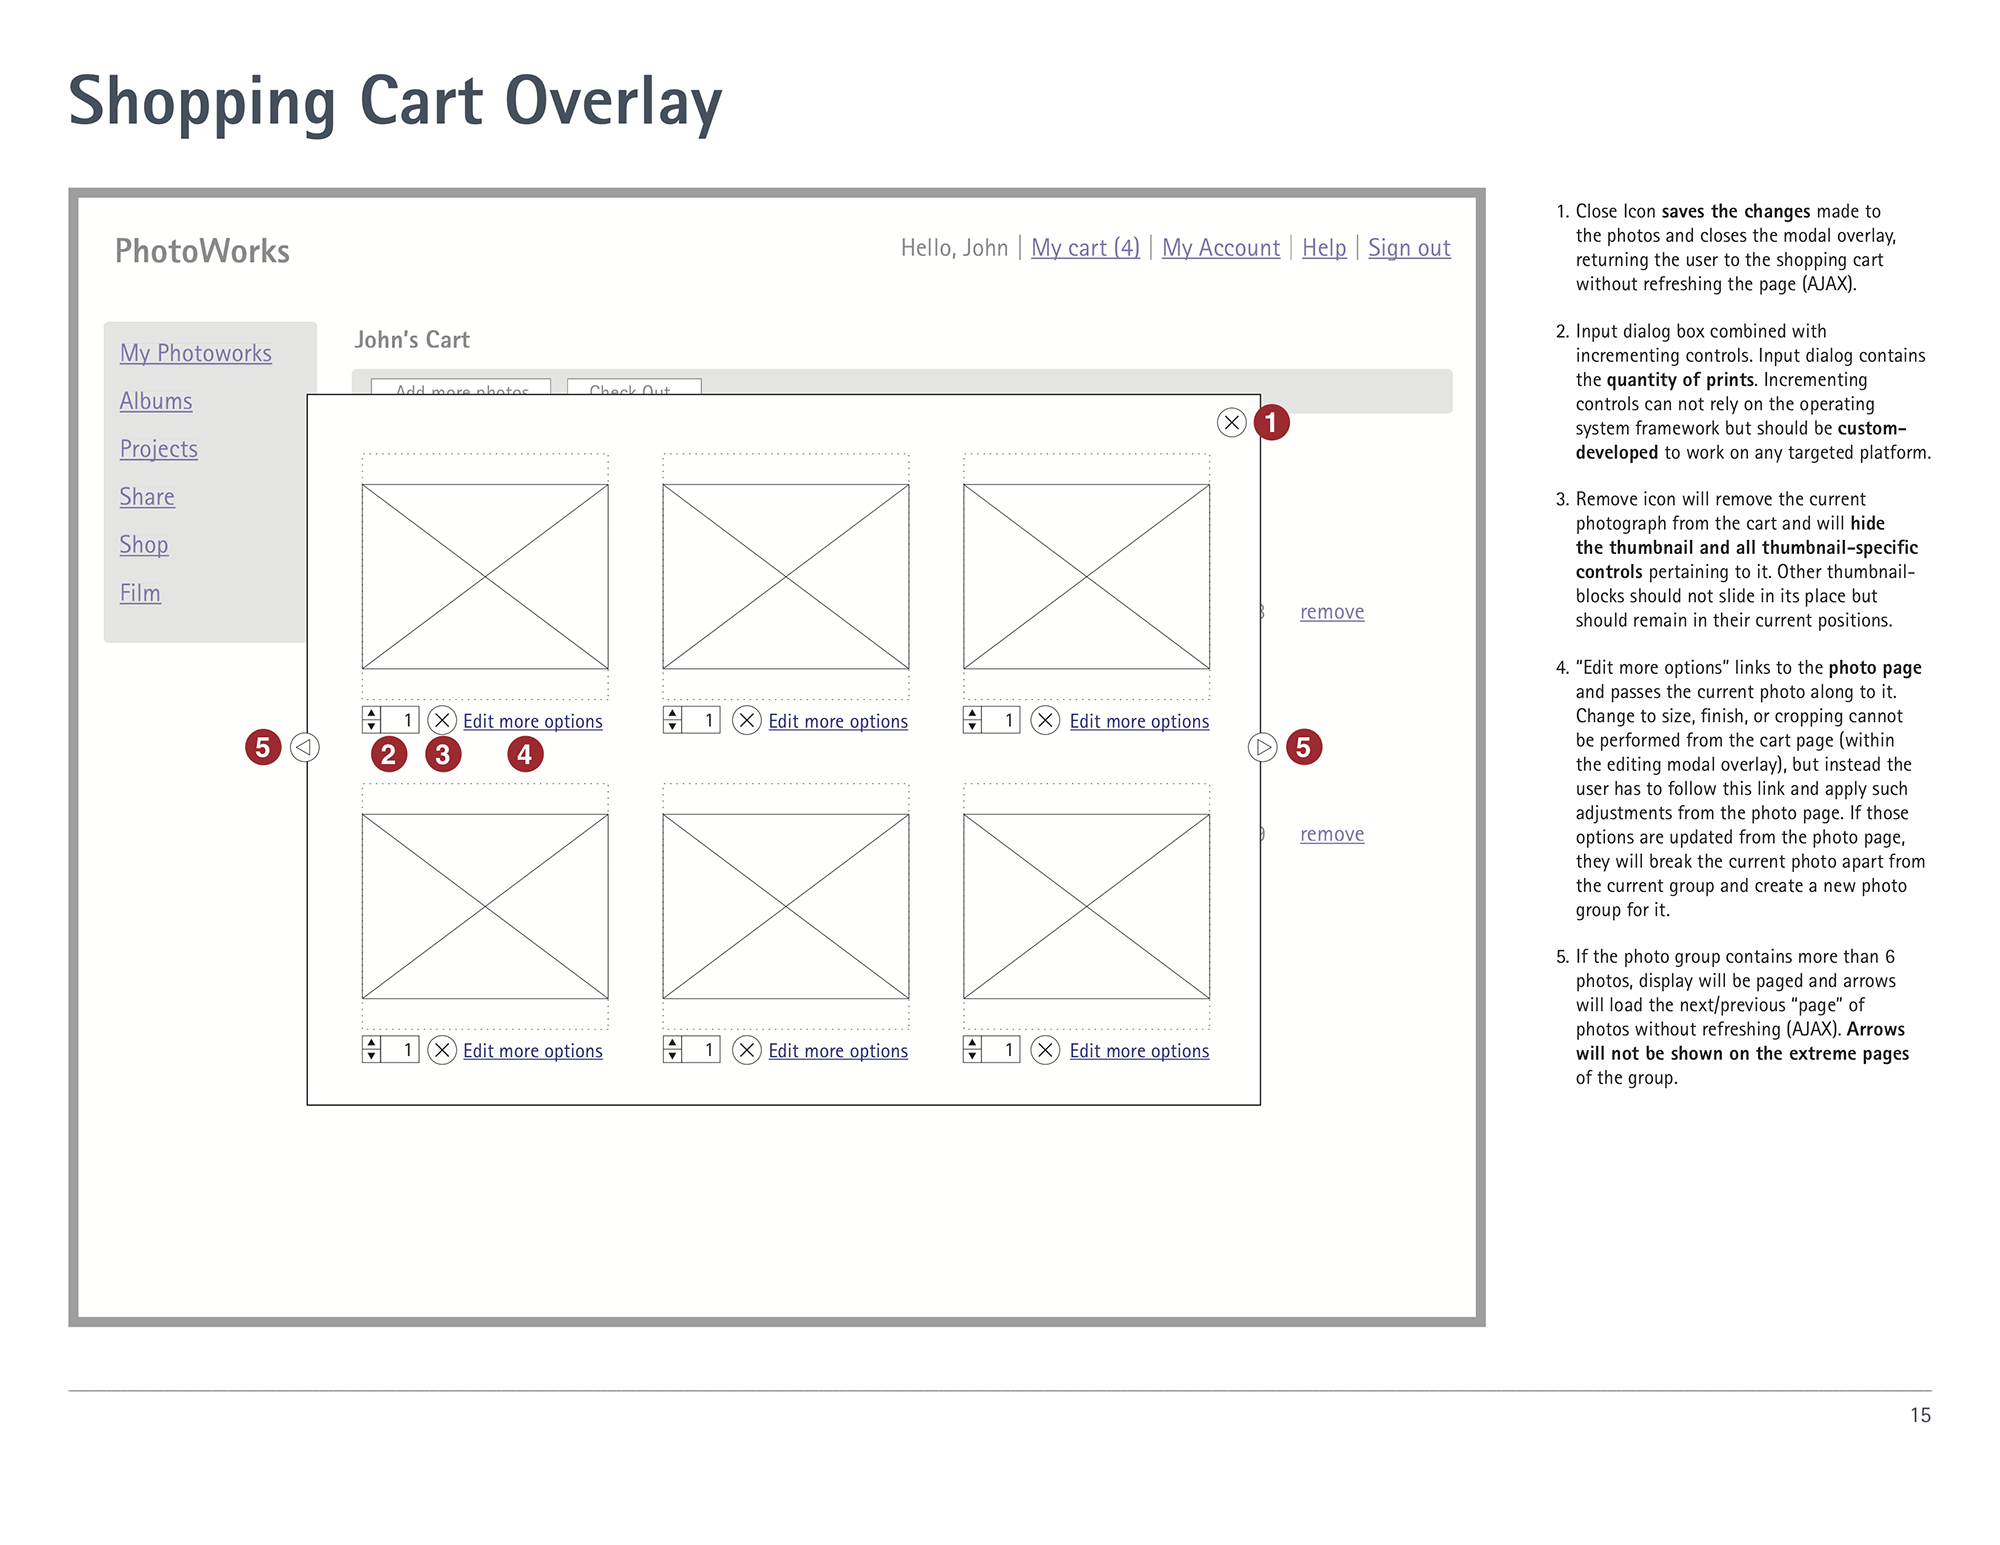 Wireframe for editing in the shopping cart